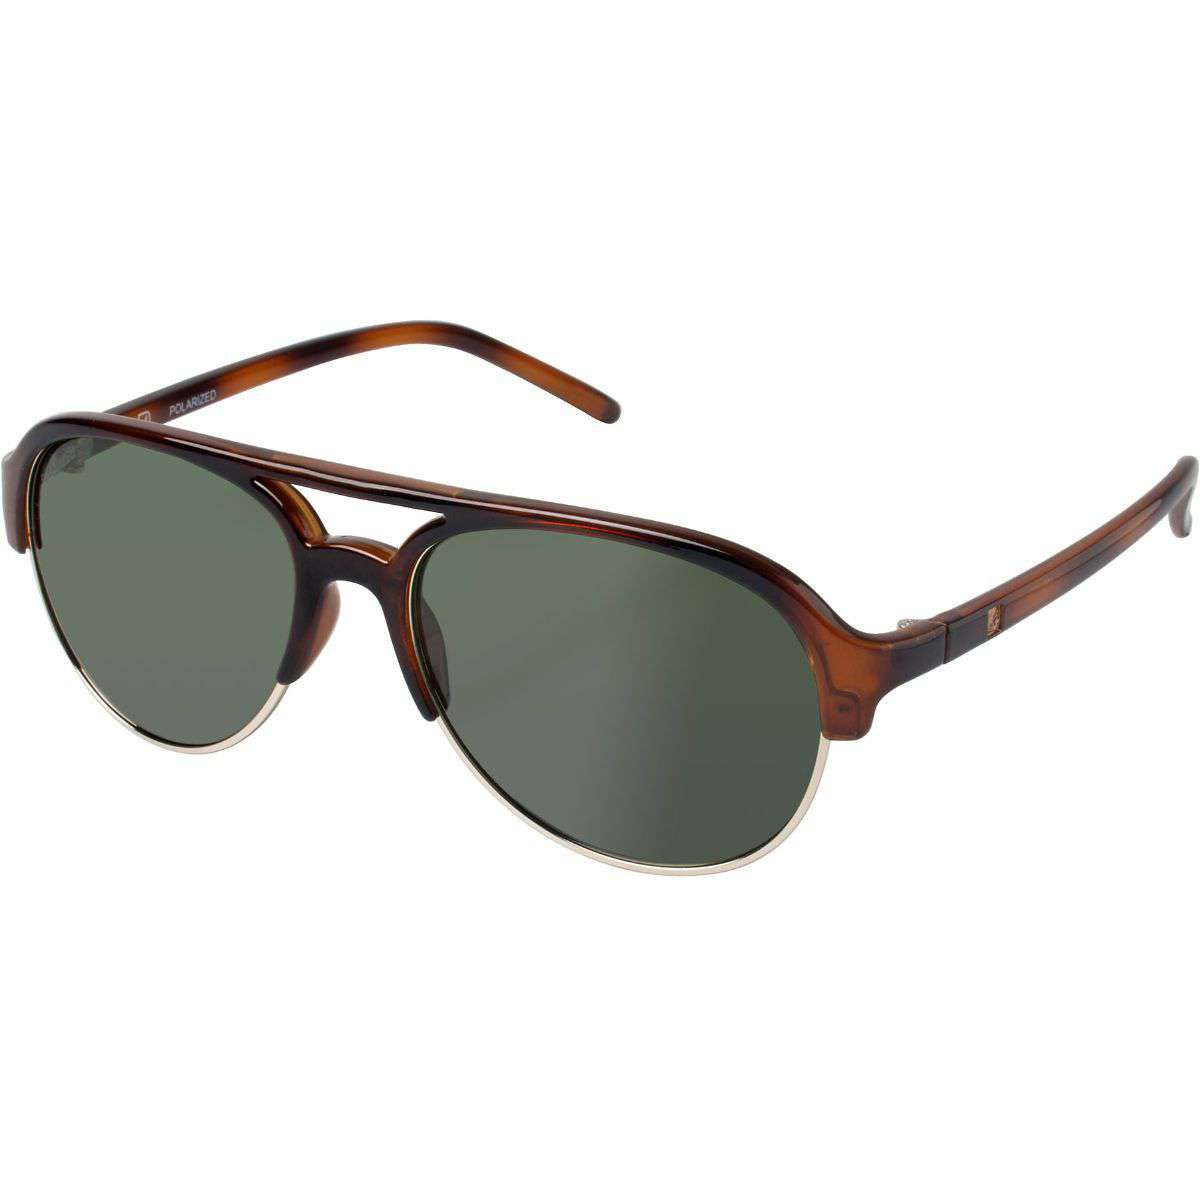 Sussex Polarized Sunglasses in Tortoise and Gold by Sperry - Country Club Prep